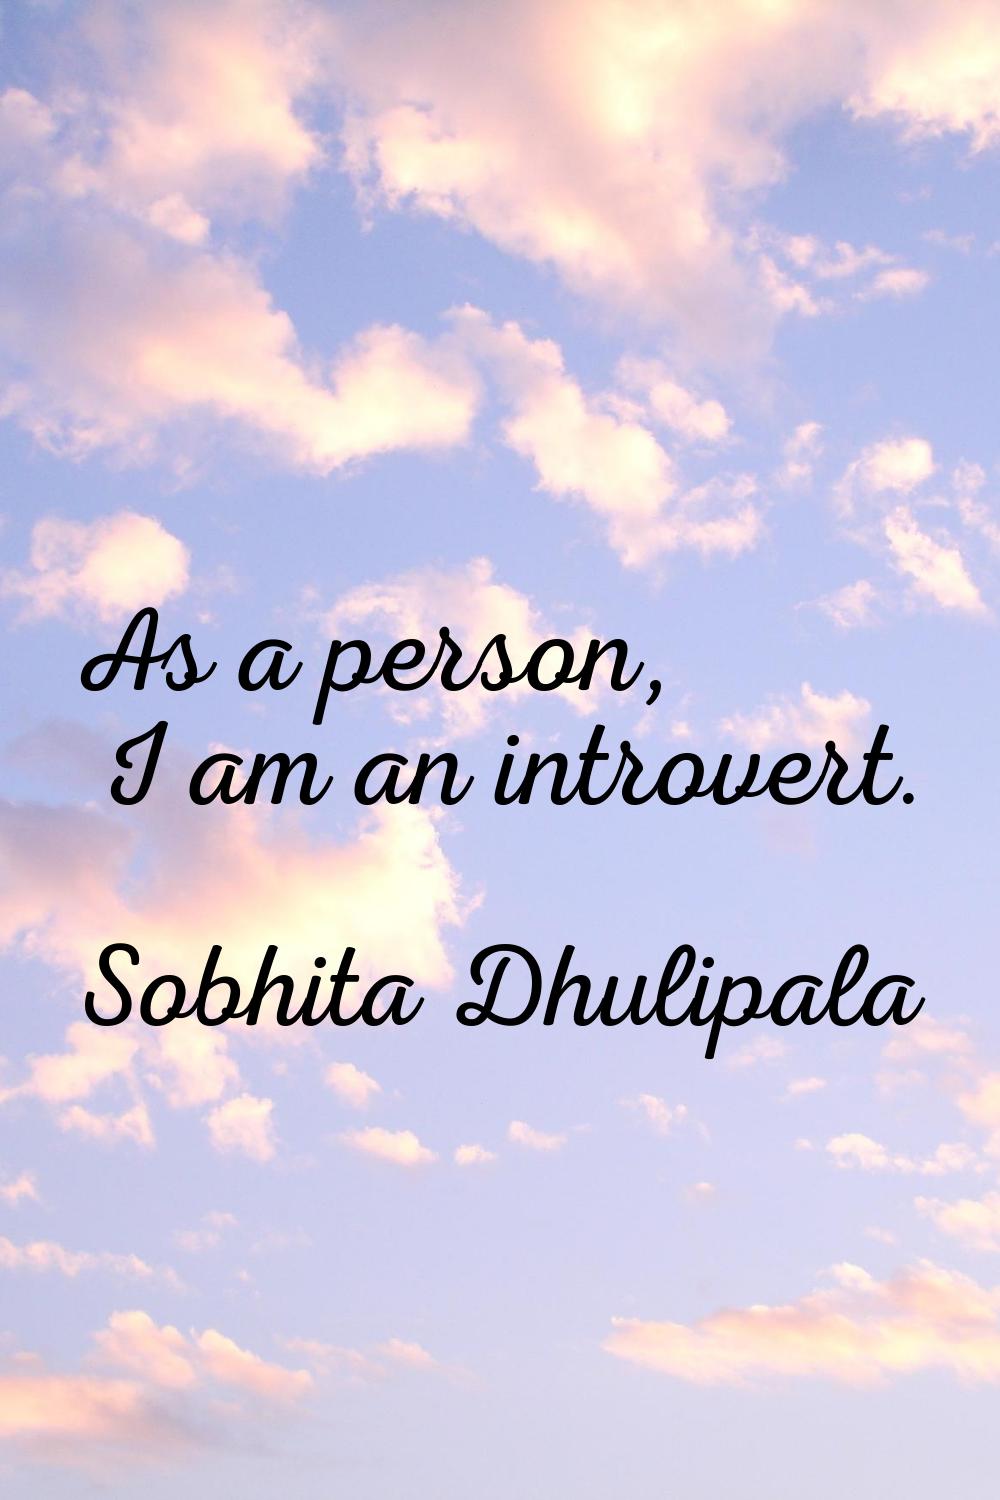 As a person, I am an introvert.